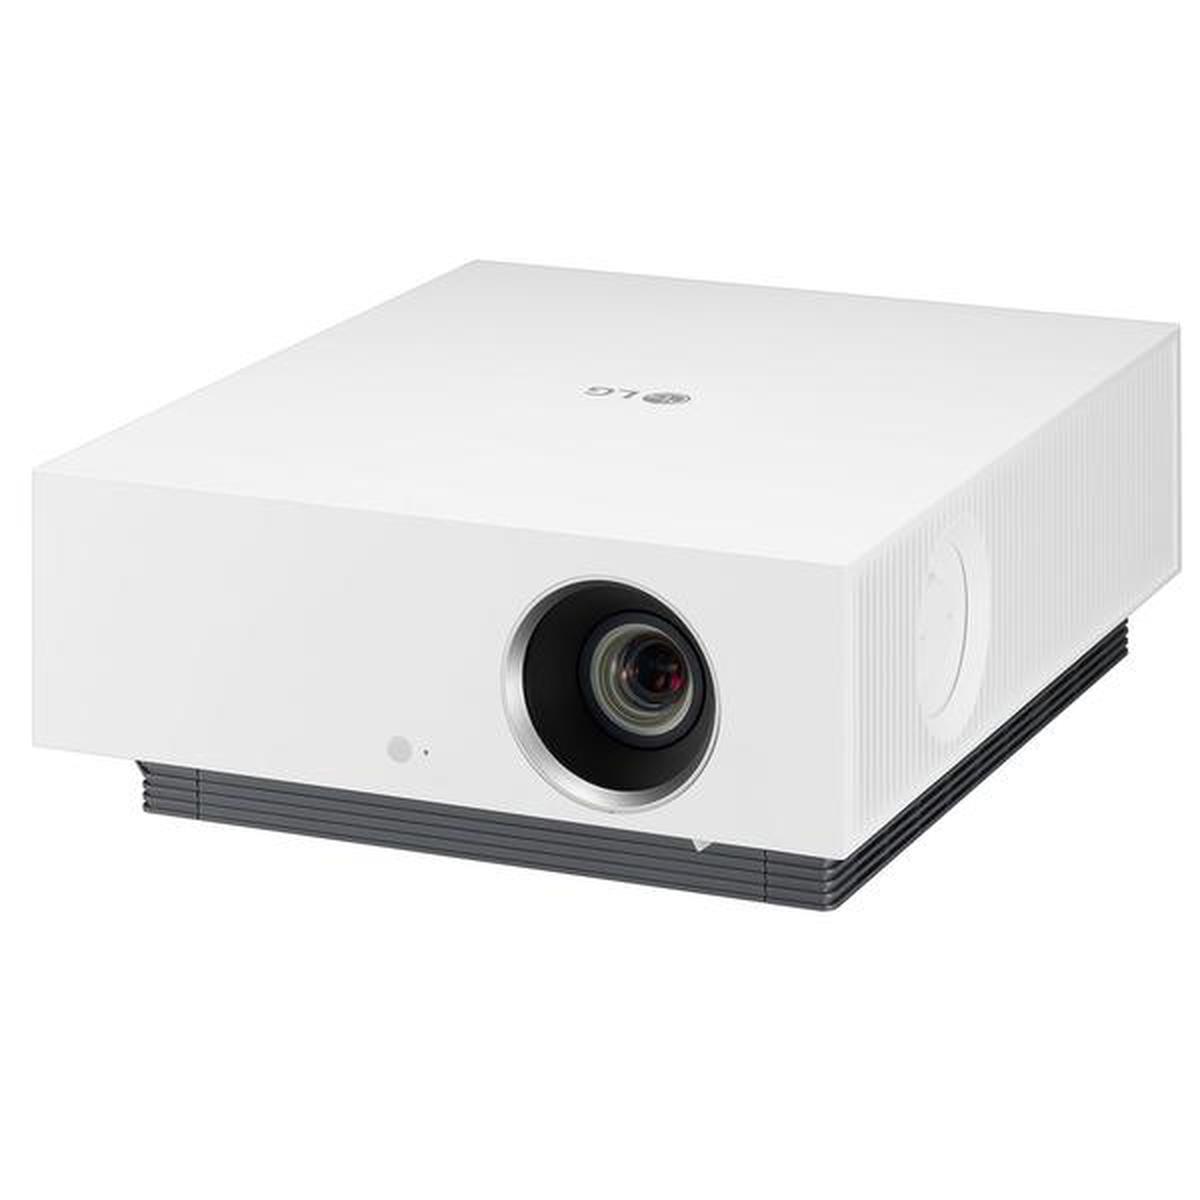 LG CineBeam HU810P projector: A little expensive, but strives for perfection